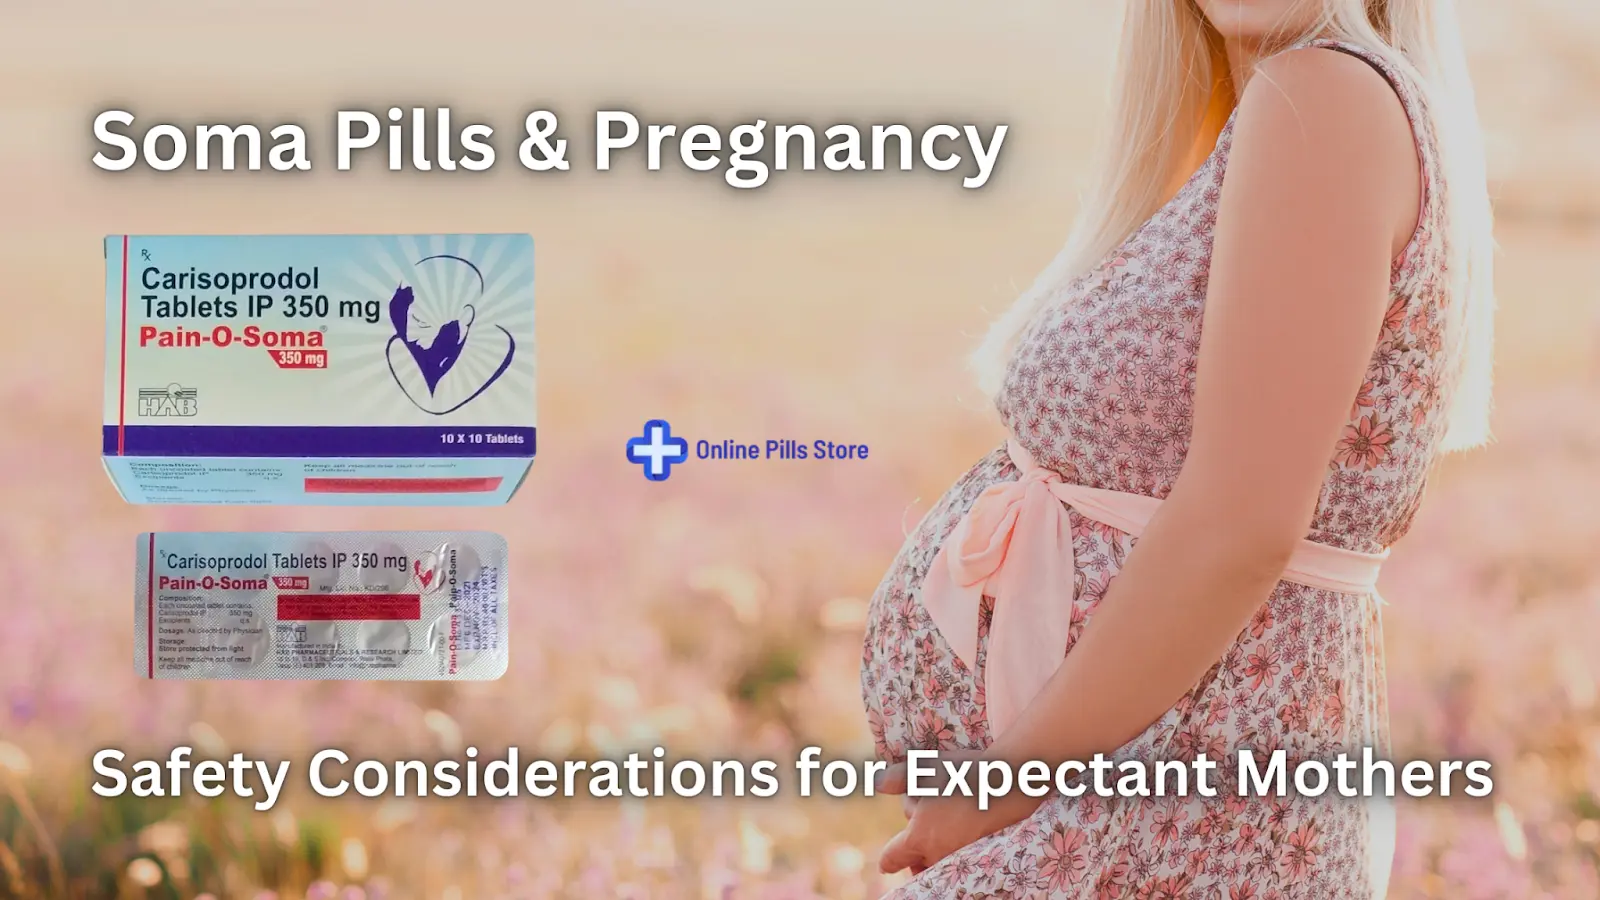 Soma Pills and Pregnancy: Safety Considerations for Expectant Mothers